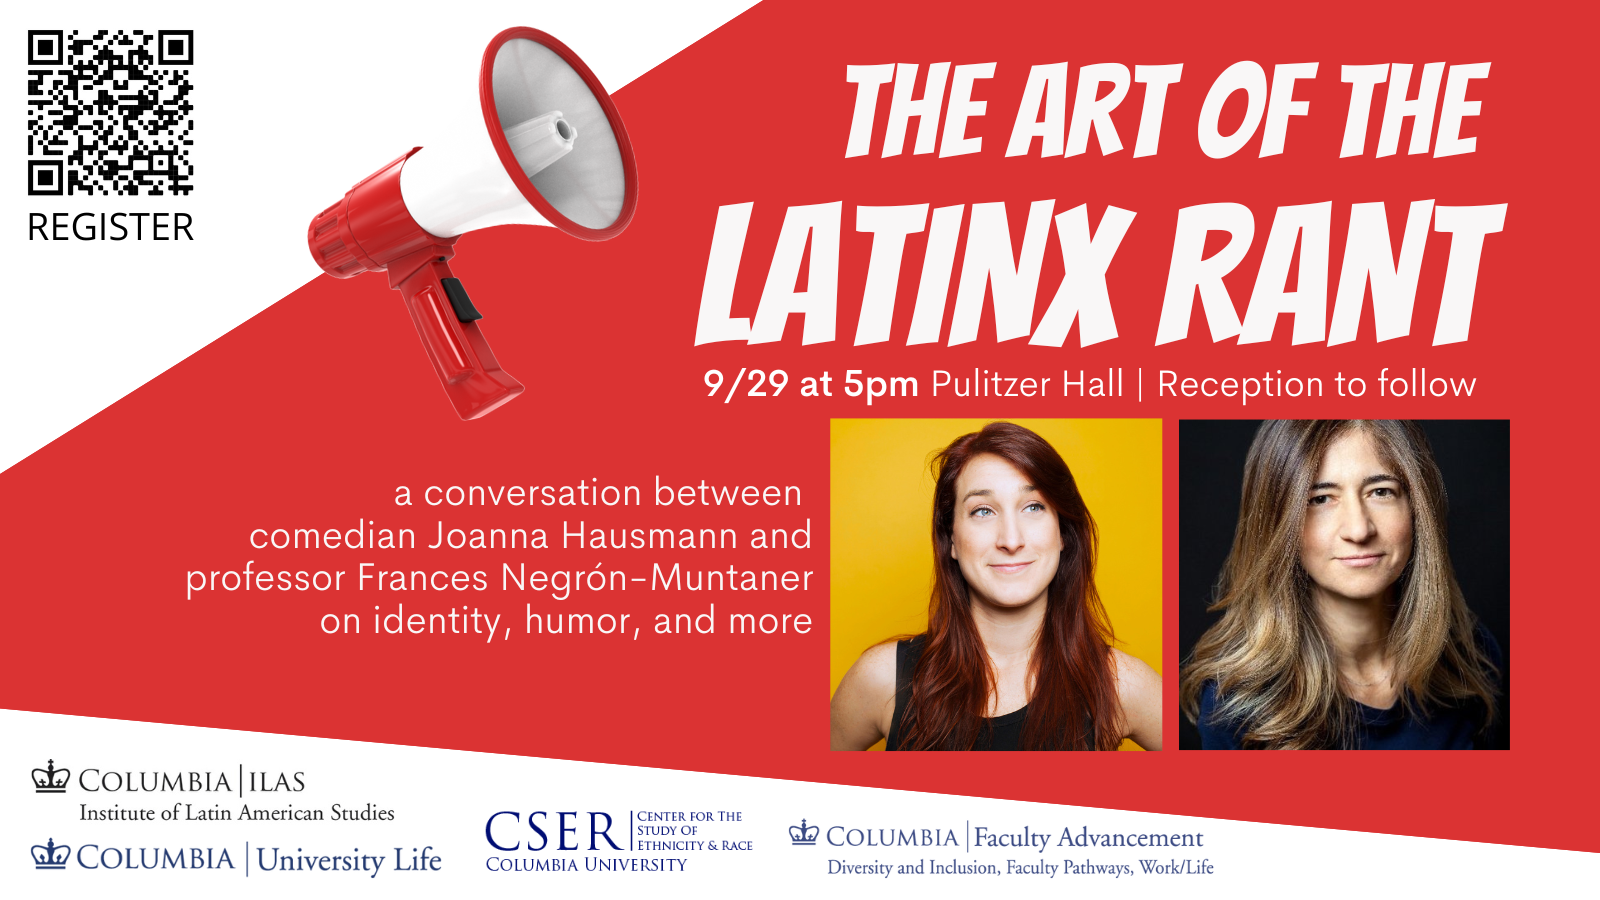 The Art of the Latinx Rant on red background, megaphone on left, images of speakers below